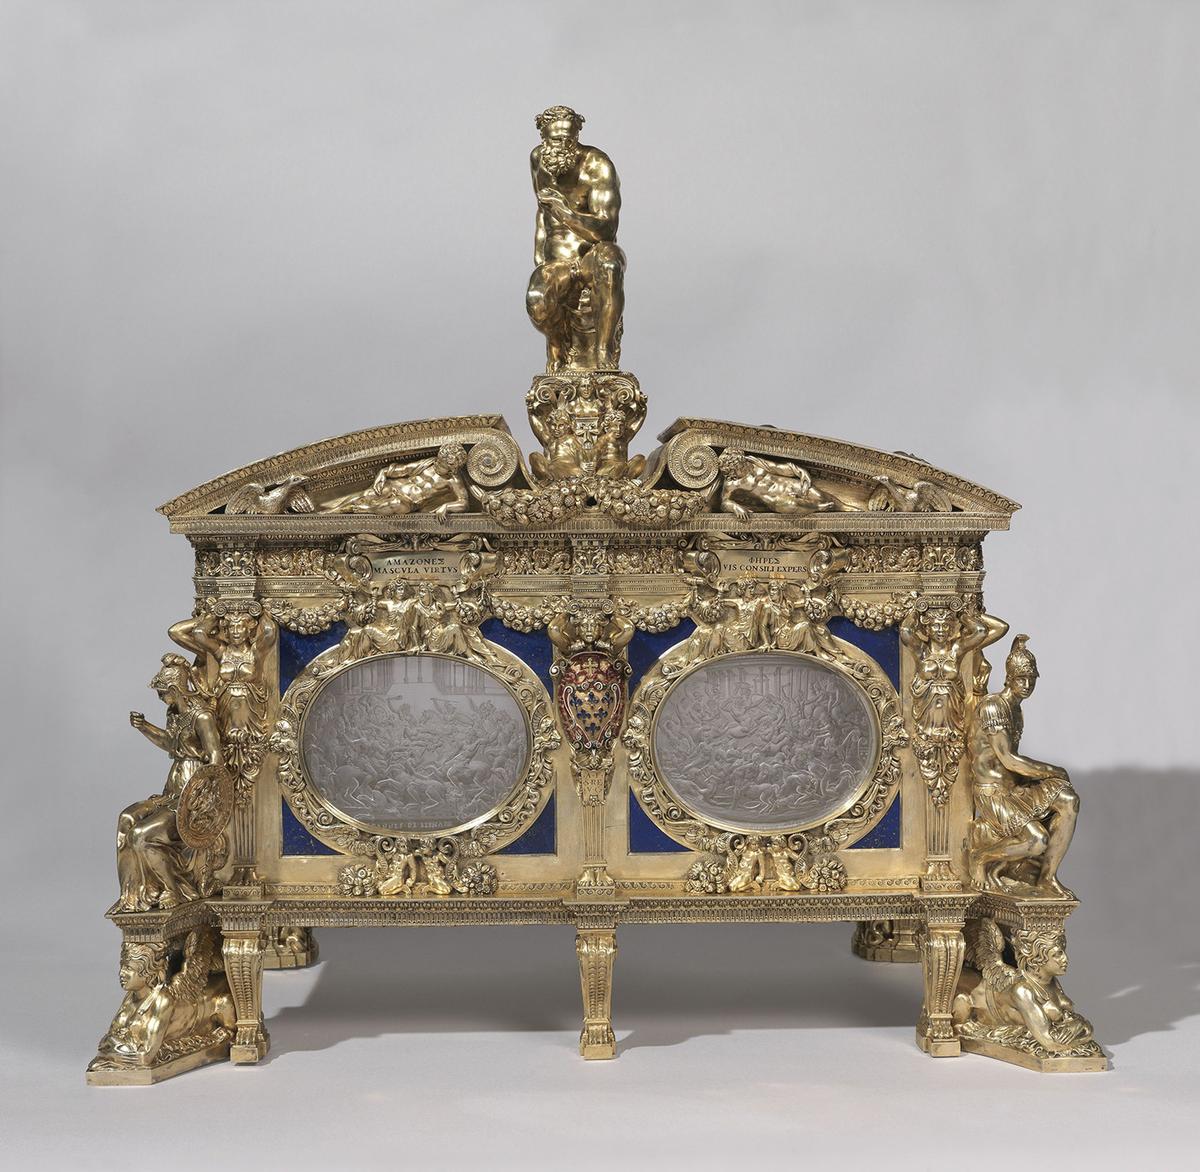 "Farnese Casket (Cassetta Farnese)," 1548–1561, by Manno di Bastiano Sbari and Giovanni Bernardi. Gilded, embossed and chiseled silver, carved rock crystal, enamel and lapis lazuli; 19.3 by 16.5 by 10.2 inches. (Courtesy of the Louvre)